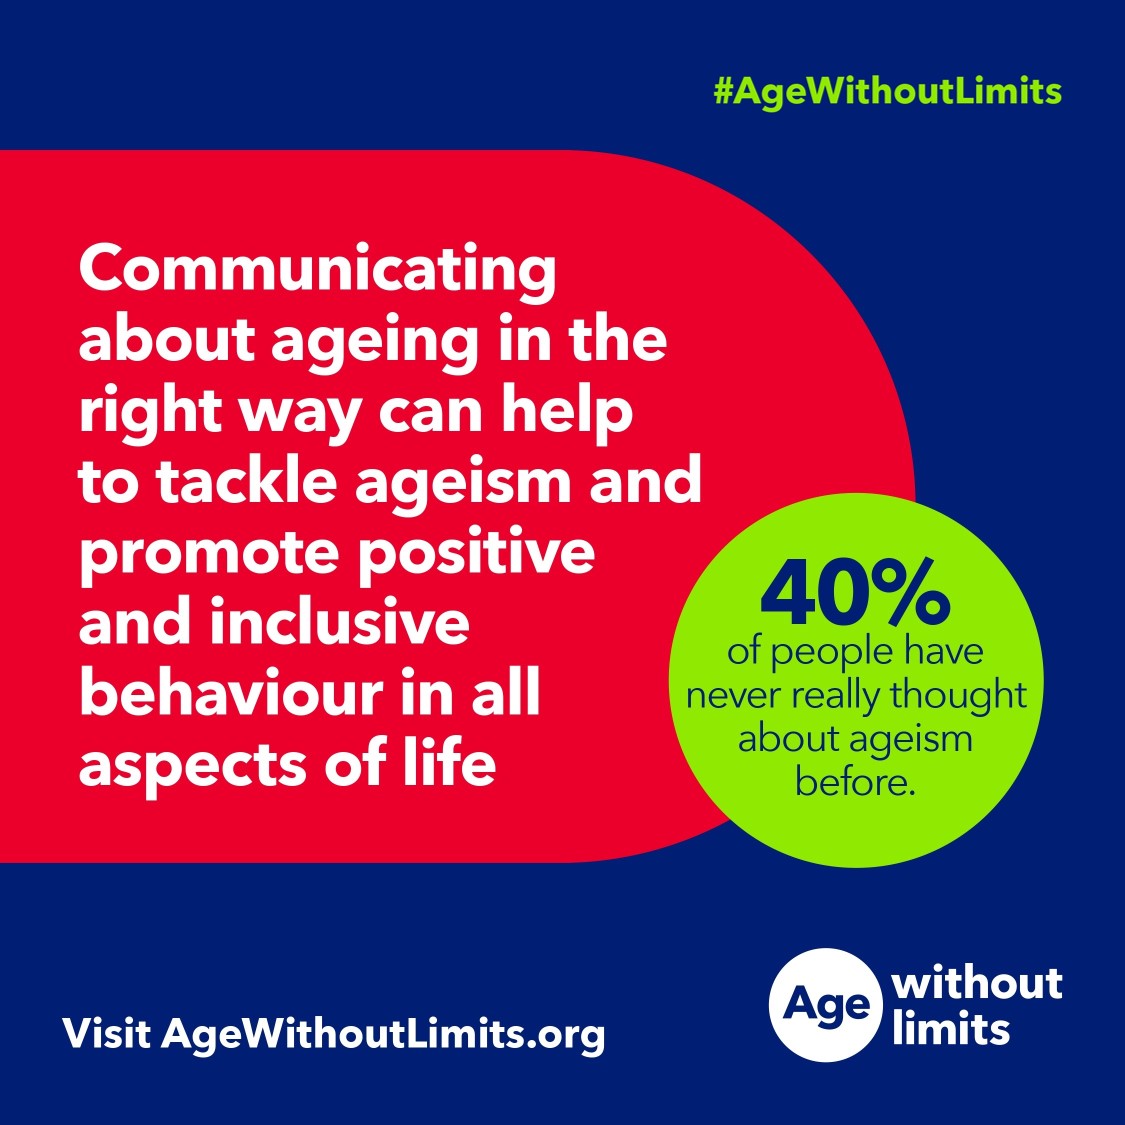 #AgeWithoutLimits Campaign